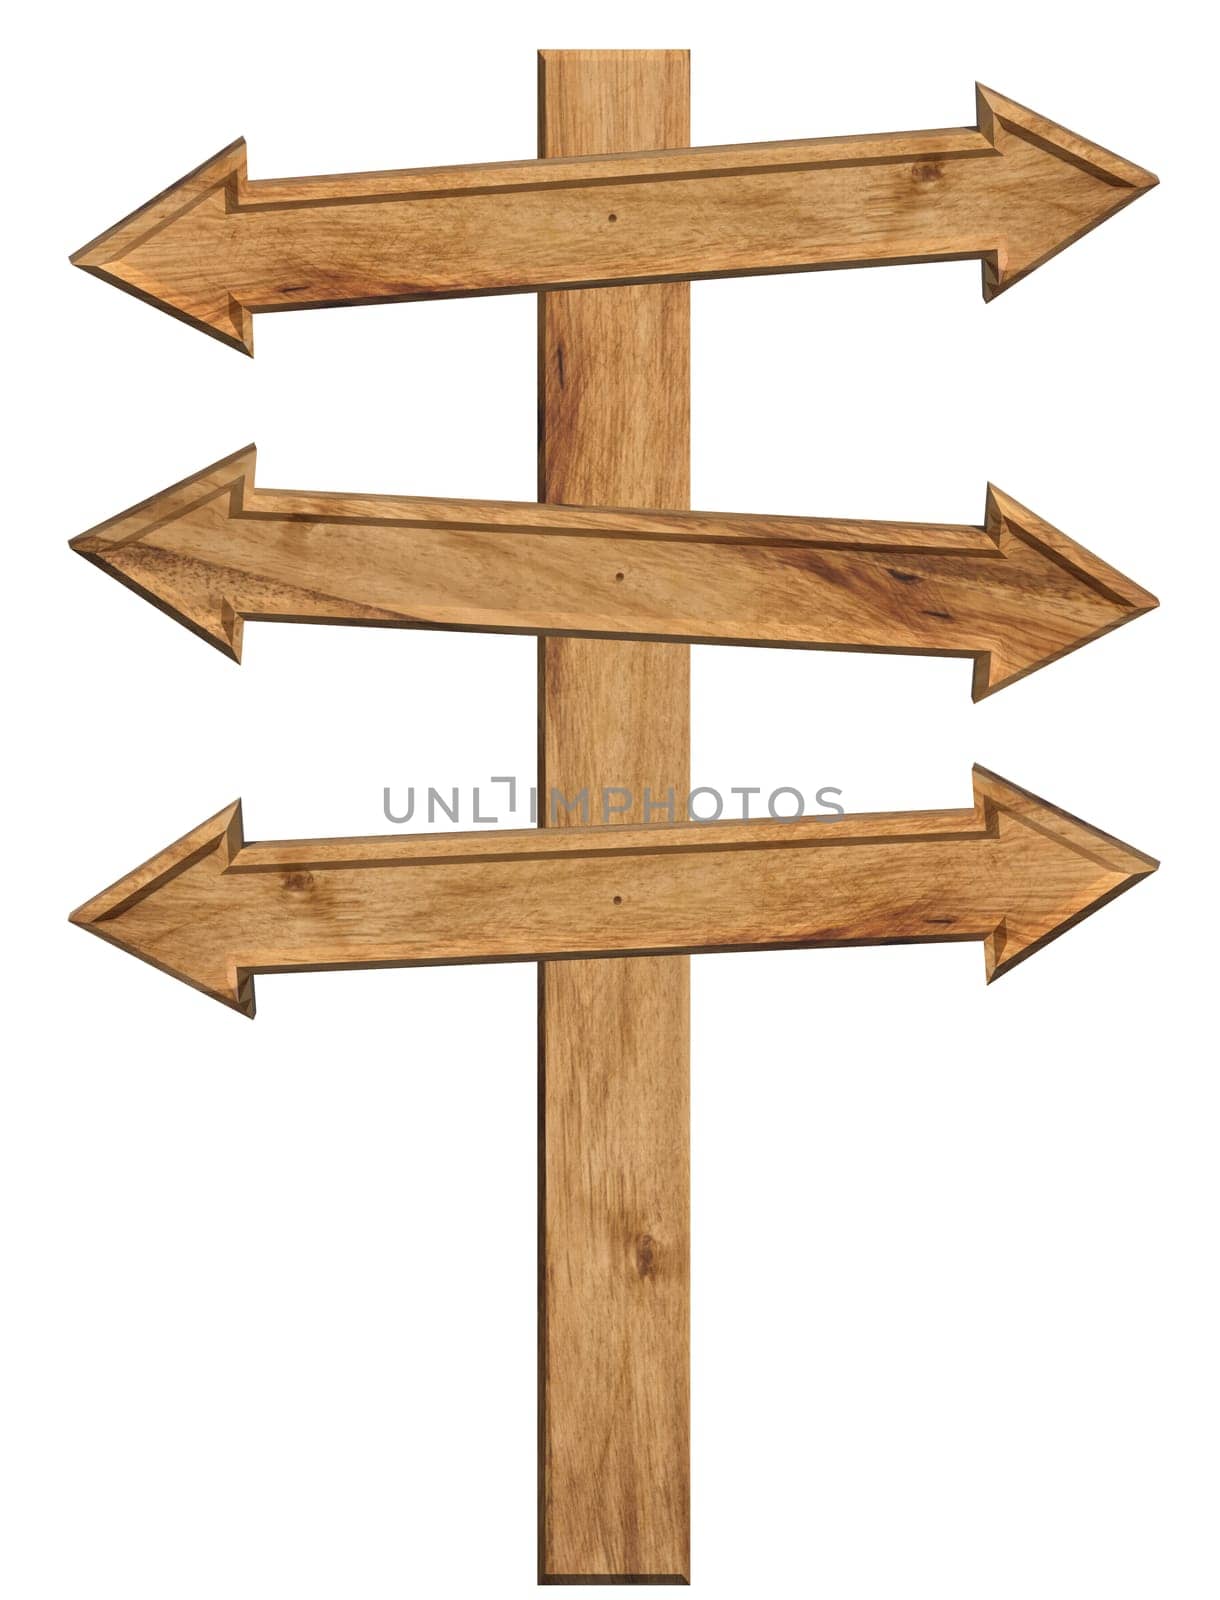 Wooden boards nailed together in the form of arrows on a pole, a direction indicator